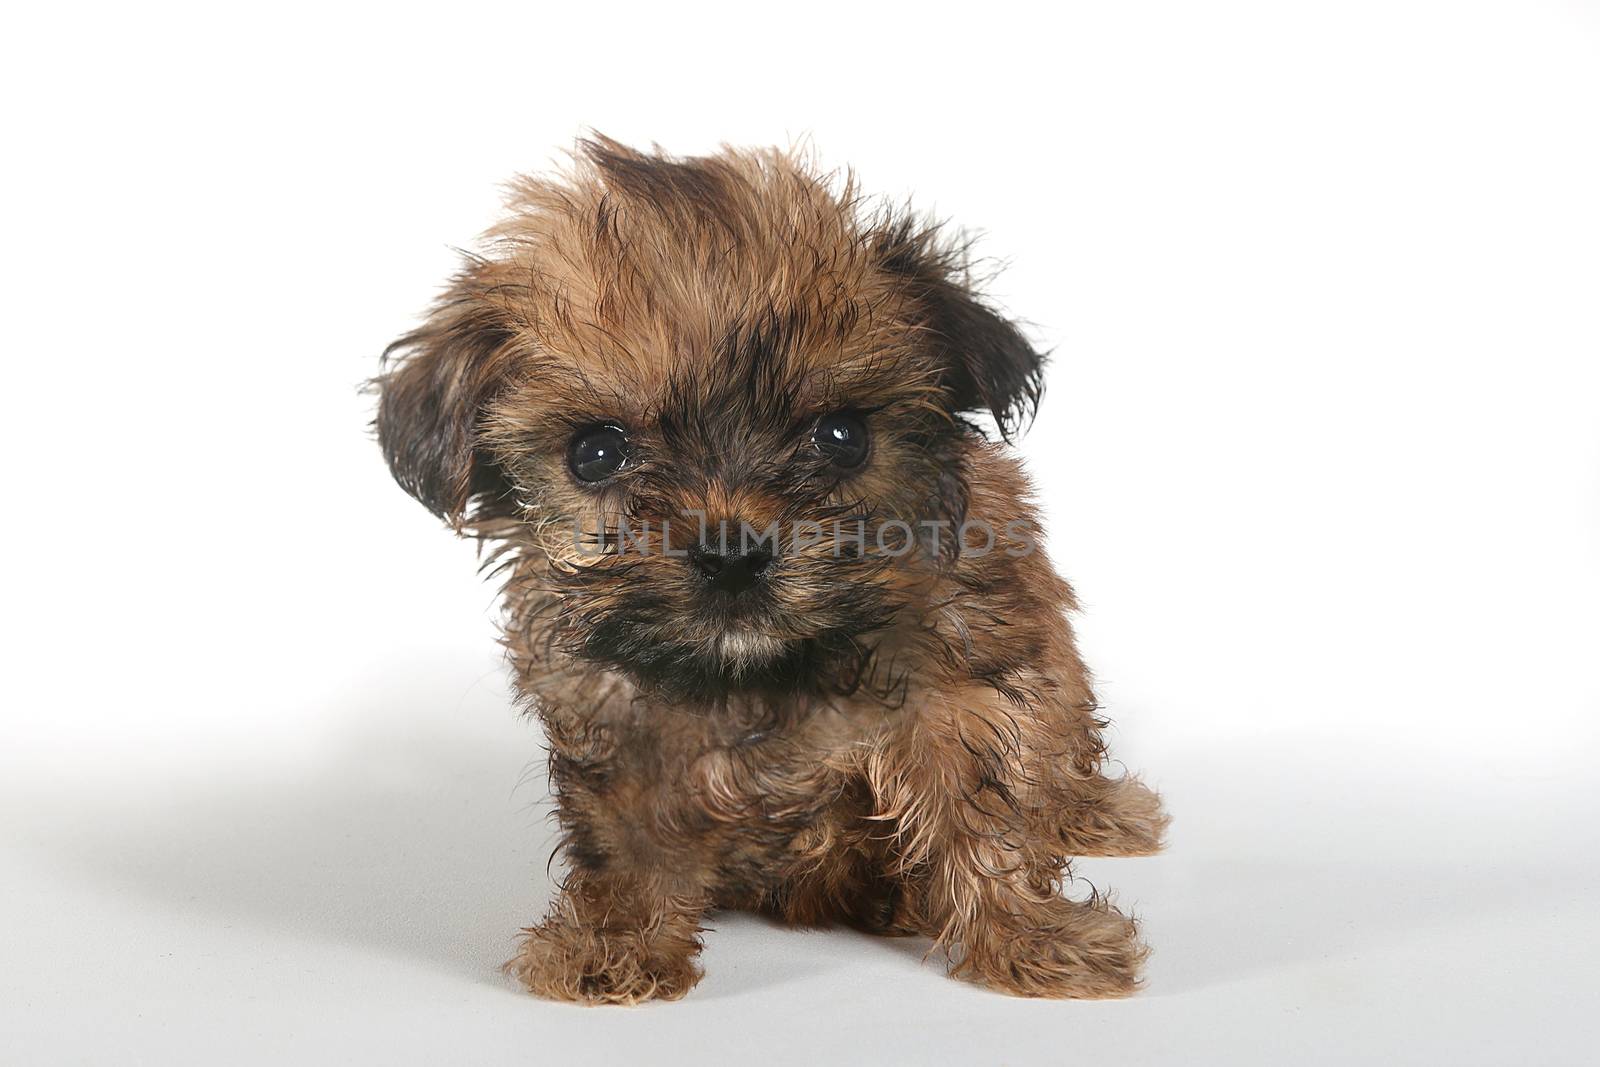 Teacup Yorkshire Terrier on White Background by tobkatrina